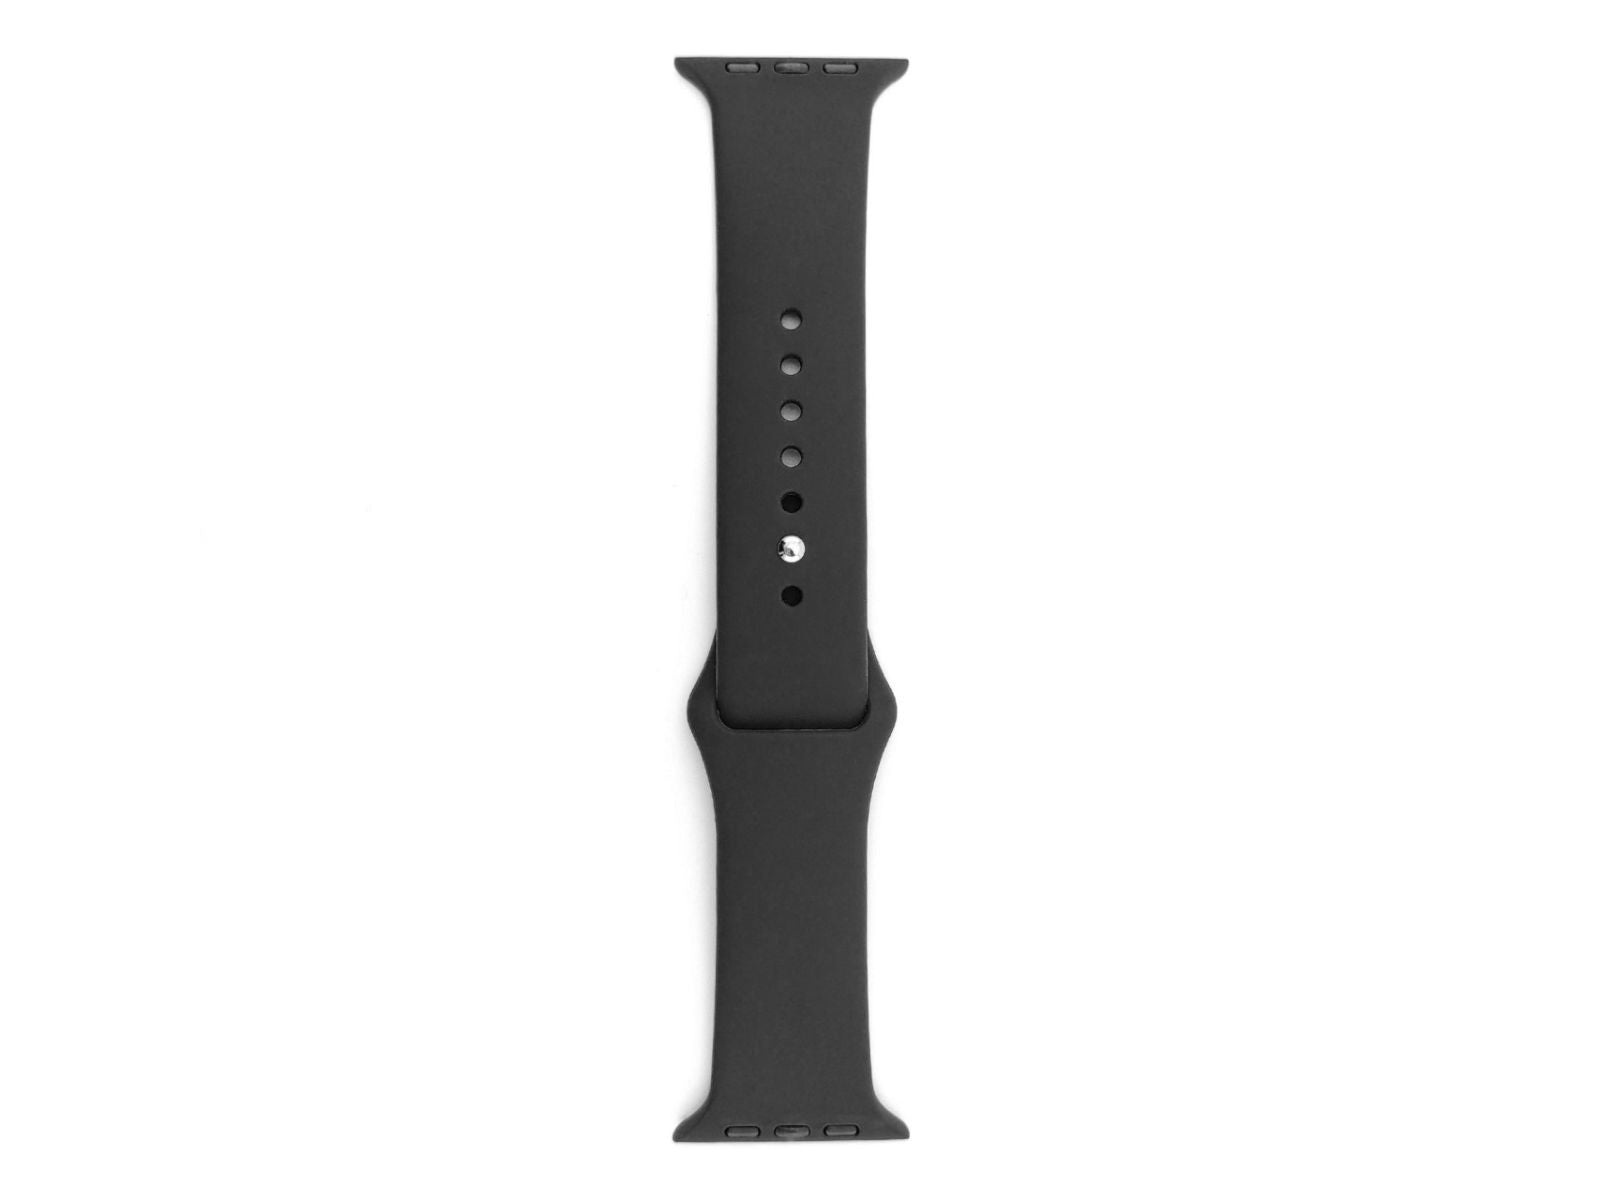  Apple Watch Strap Overhead View of The Black